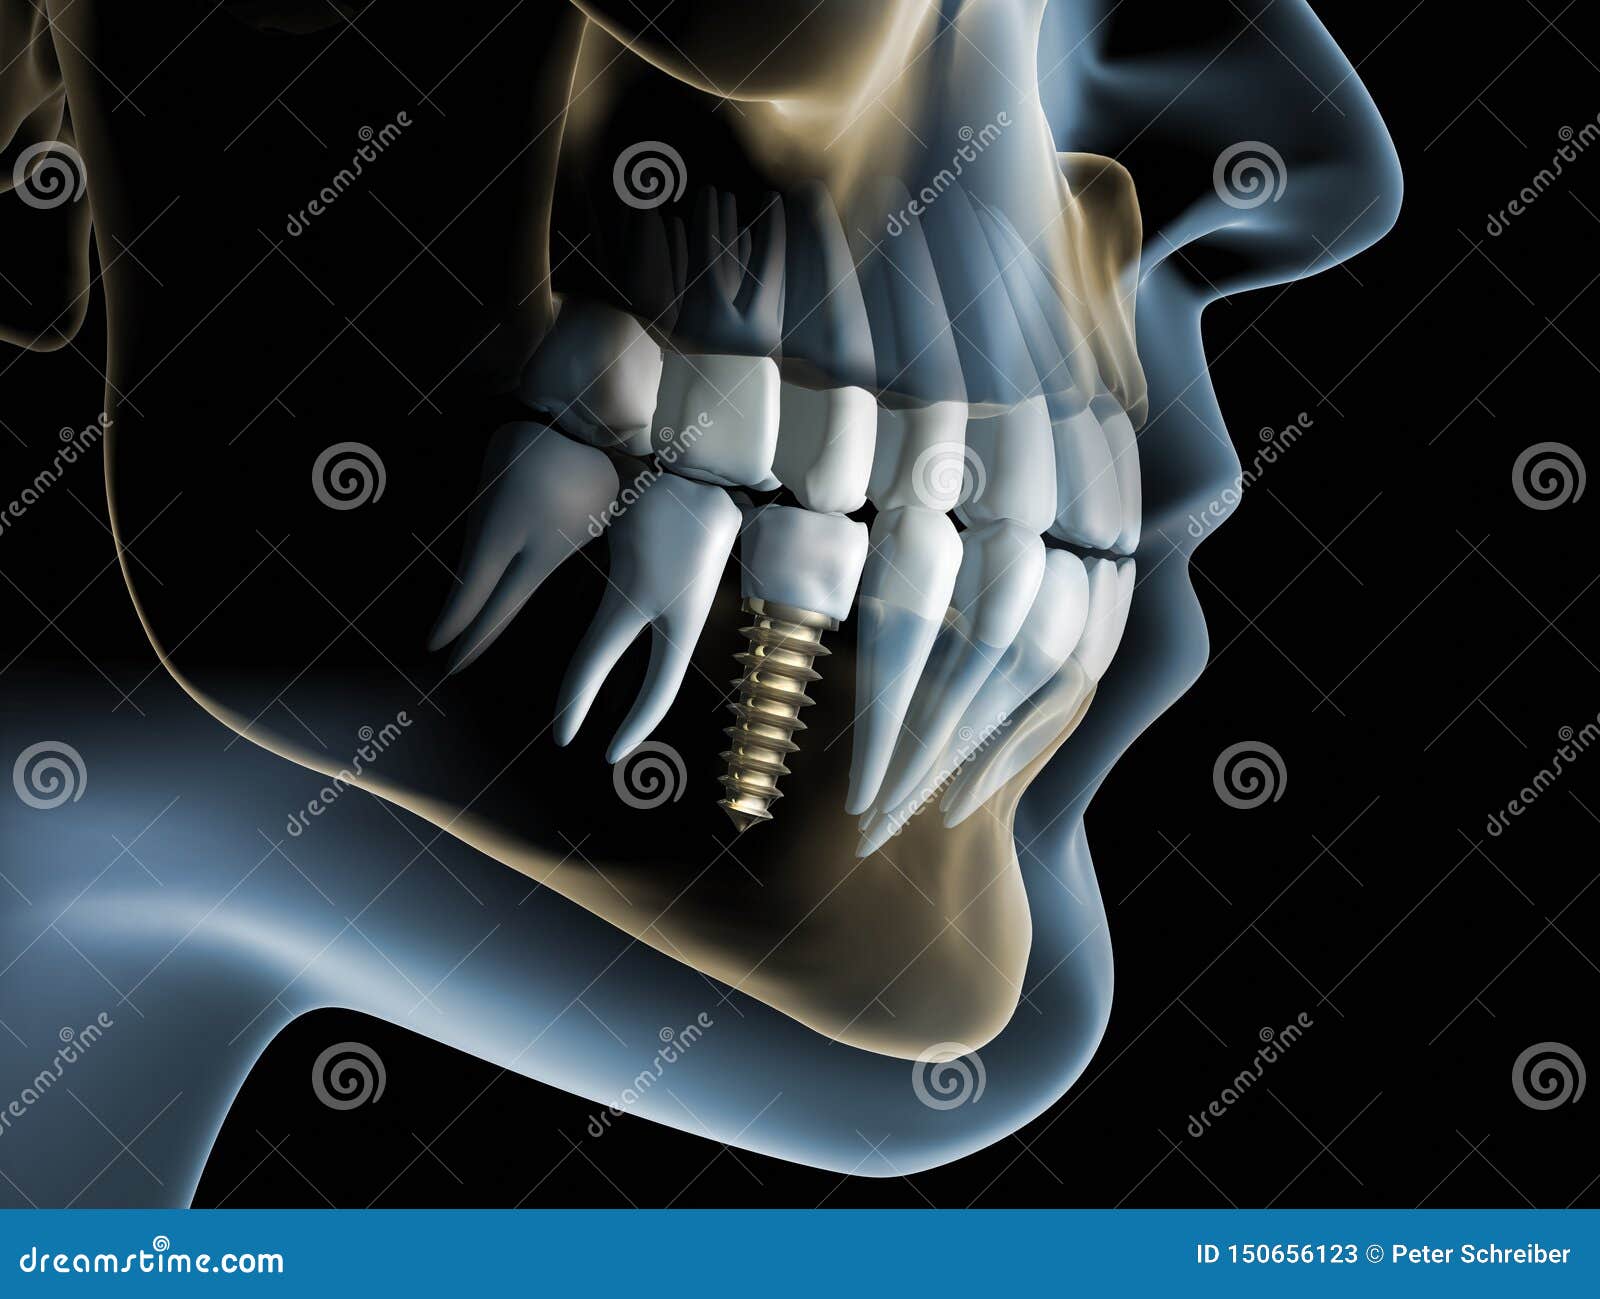 head and jaw with a dental implant